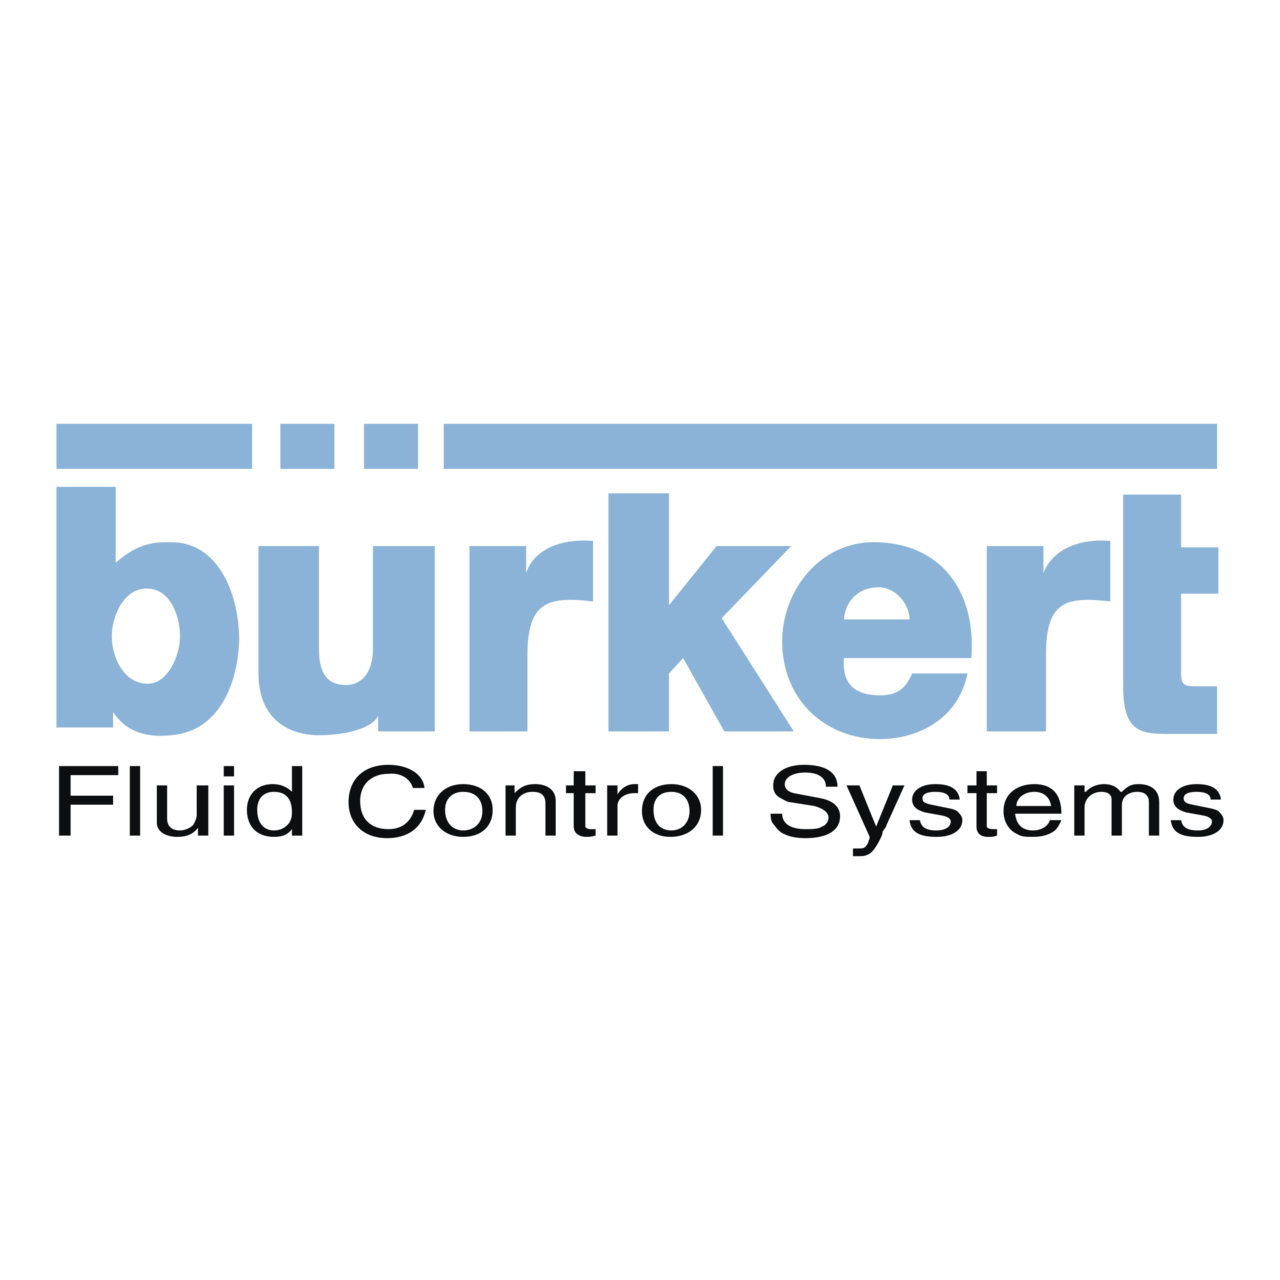 Burkert New Products